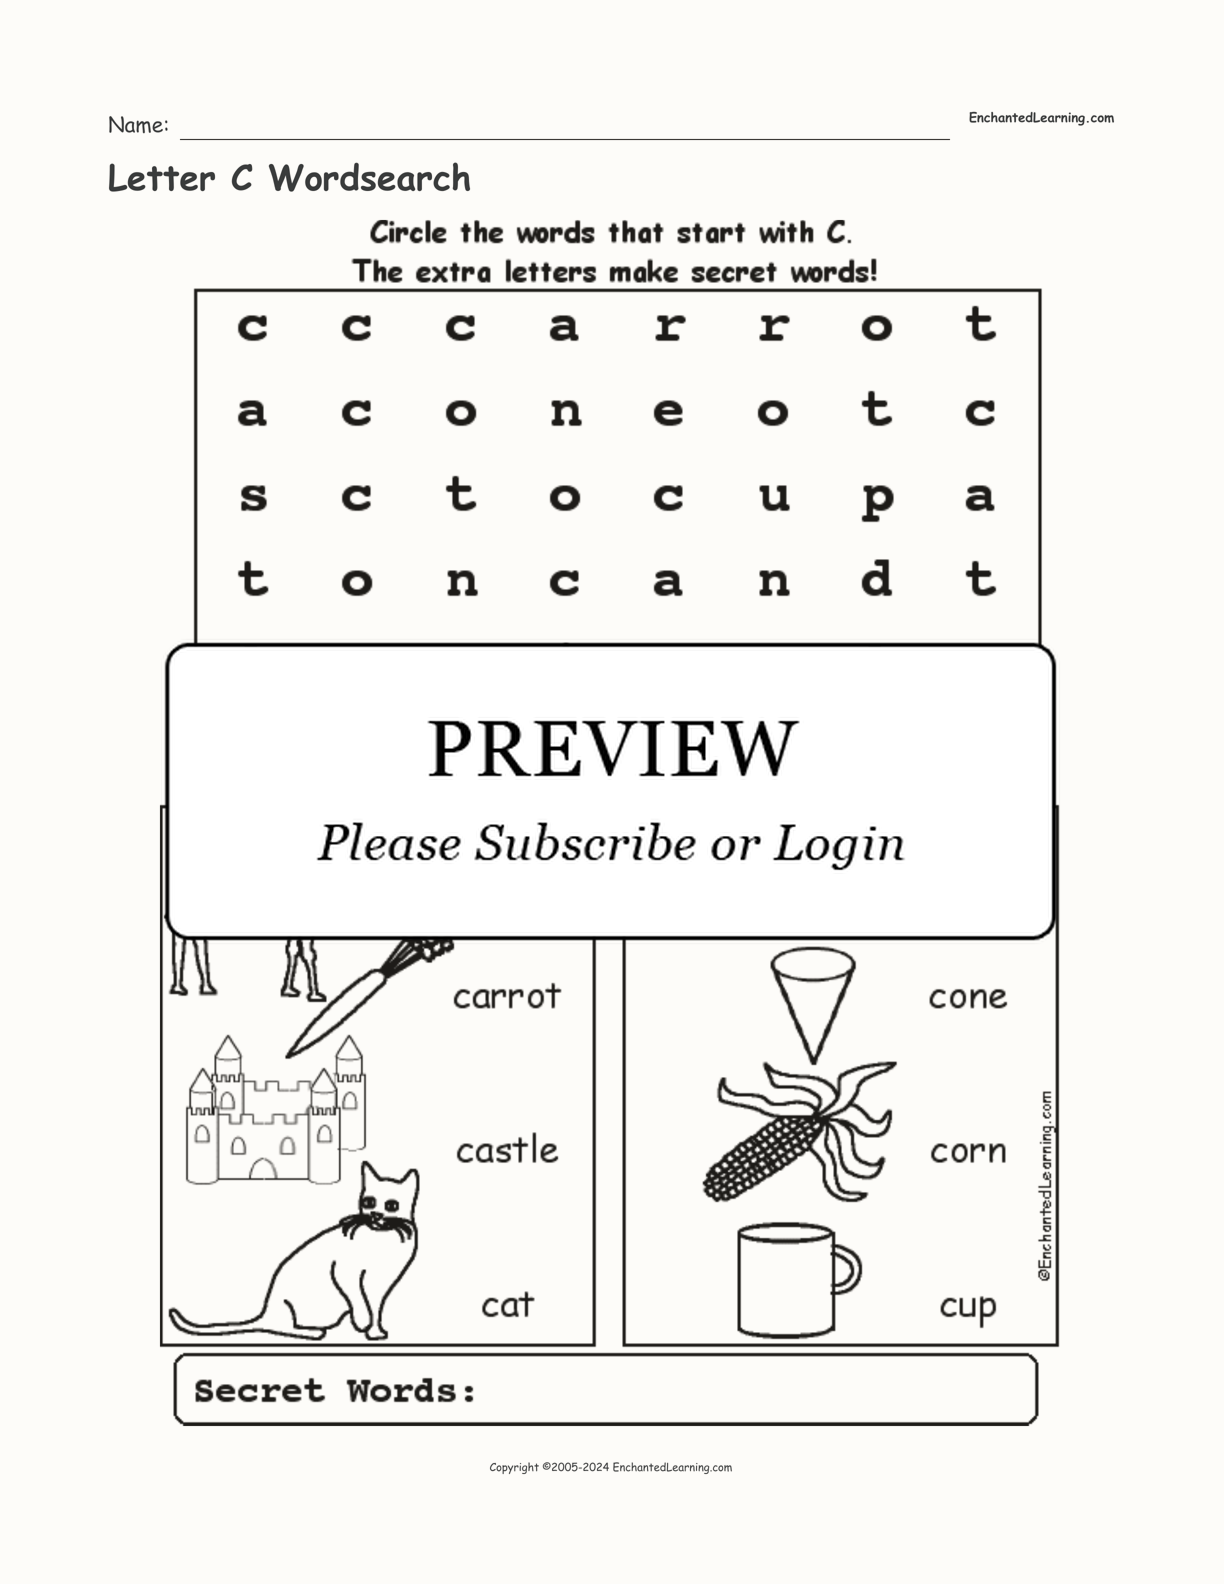 Letter C Wordsearch interactive worksheet page 1